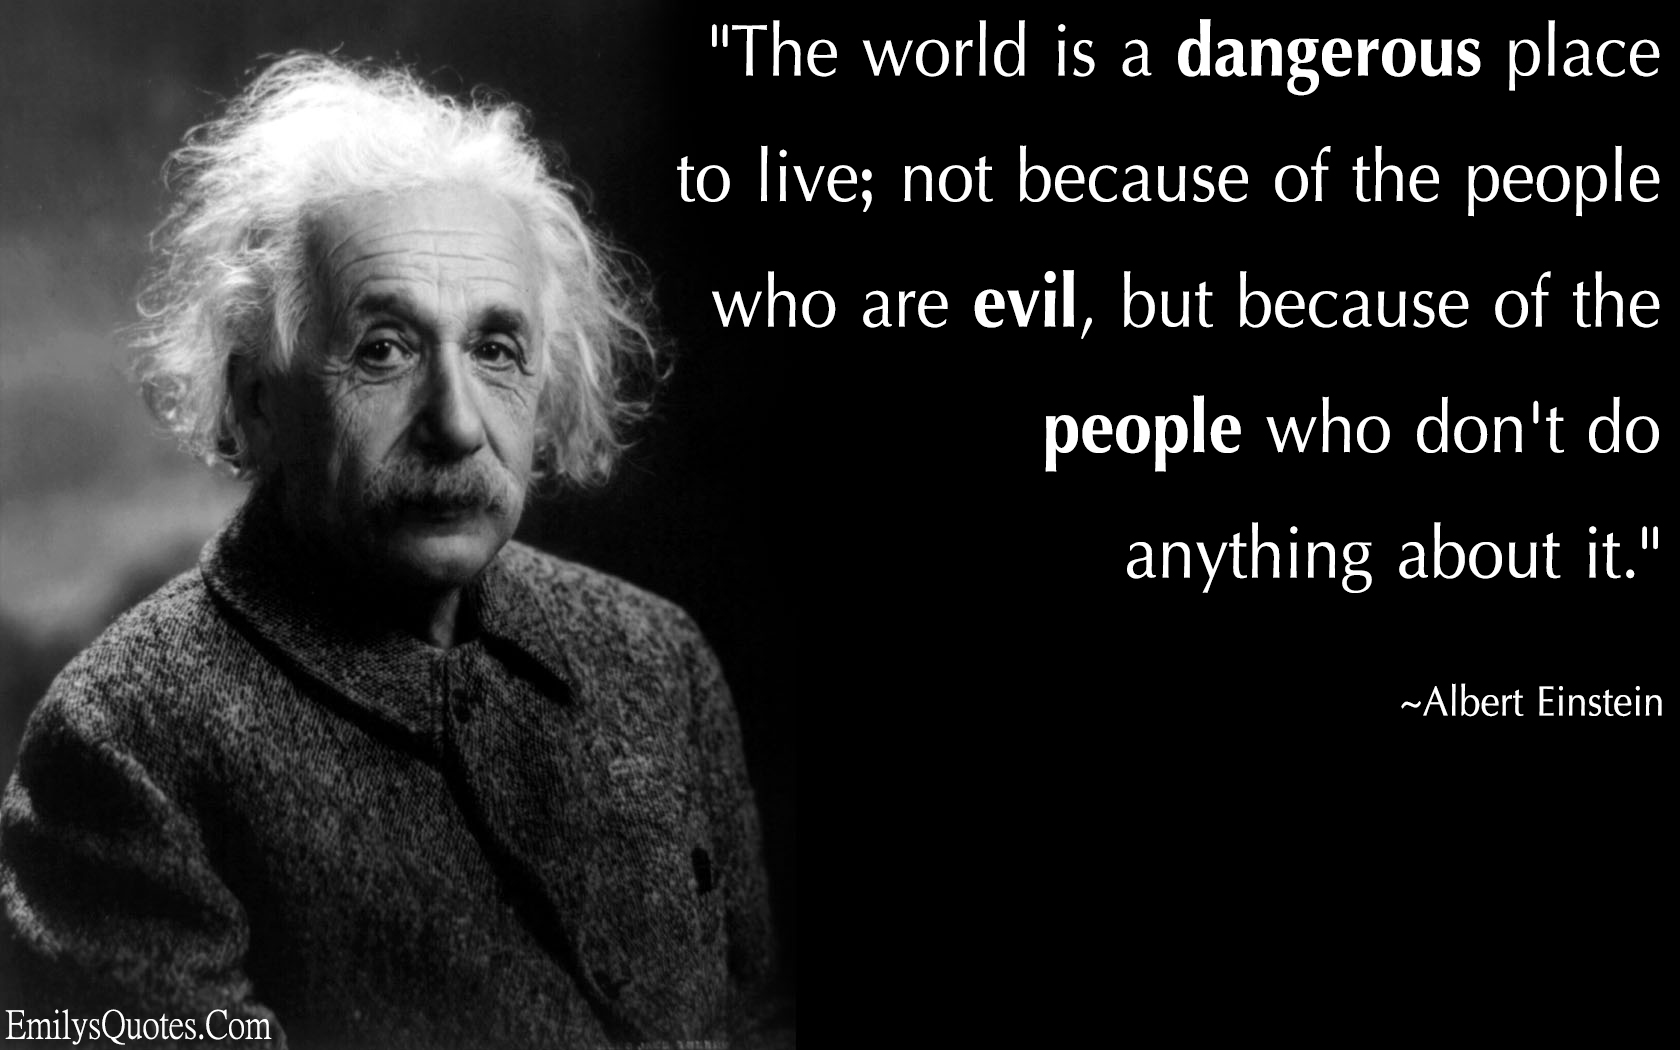 The world is a dangerous place to live; not because of the people who are evil, but because of the people who don’t do anything about it